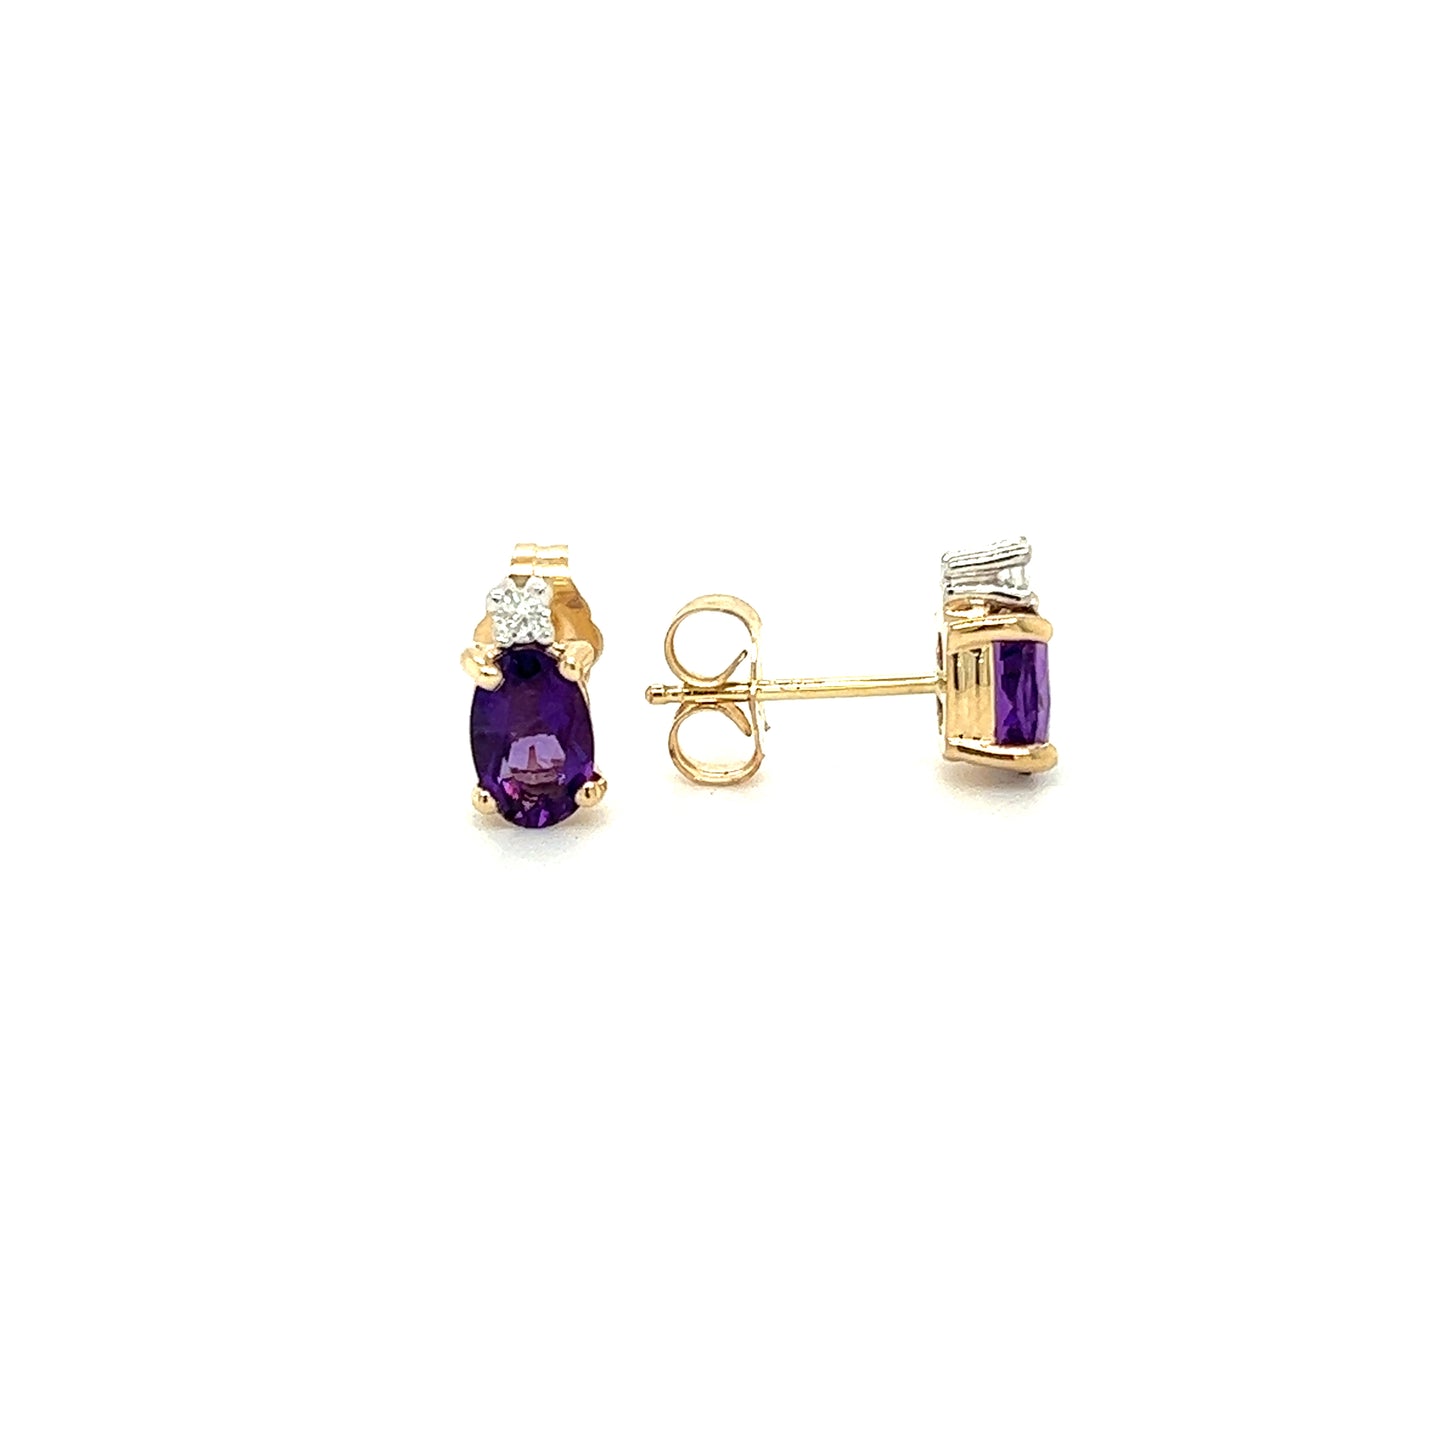 Oval Amethyst Stud Earrings with Accent Diamonds in 14K Yellow Gold Front and Side View